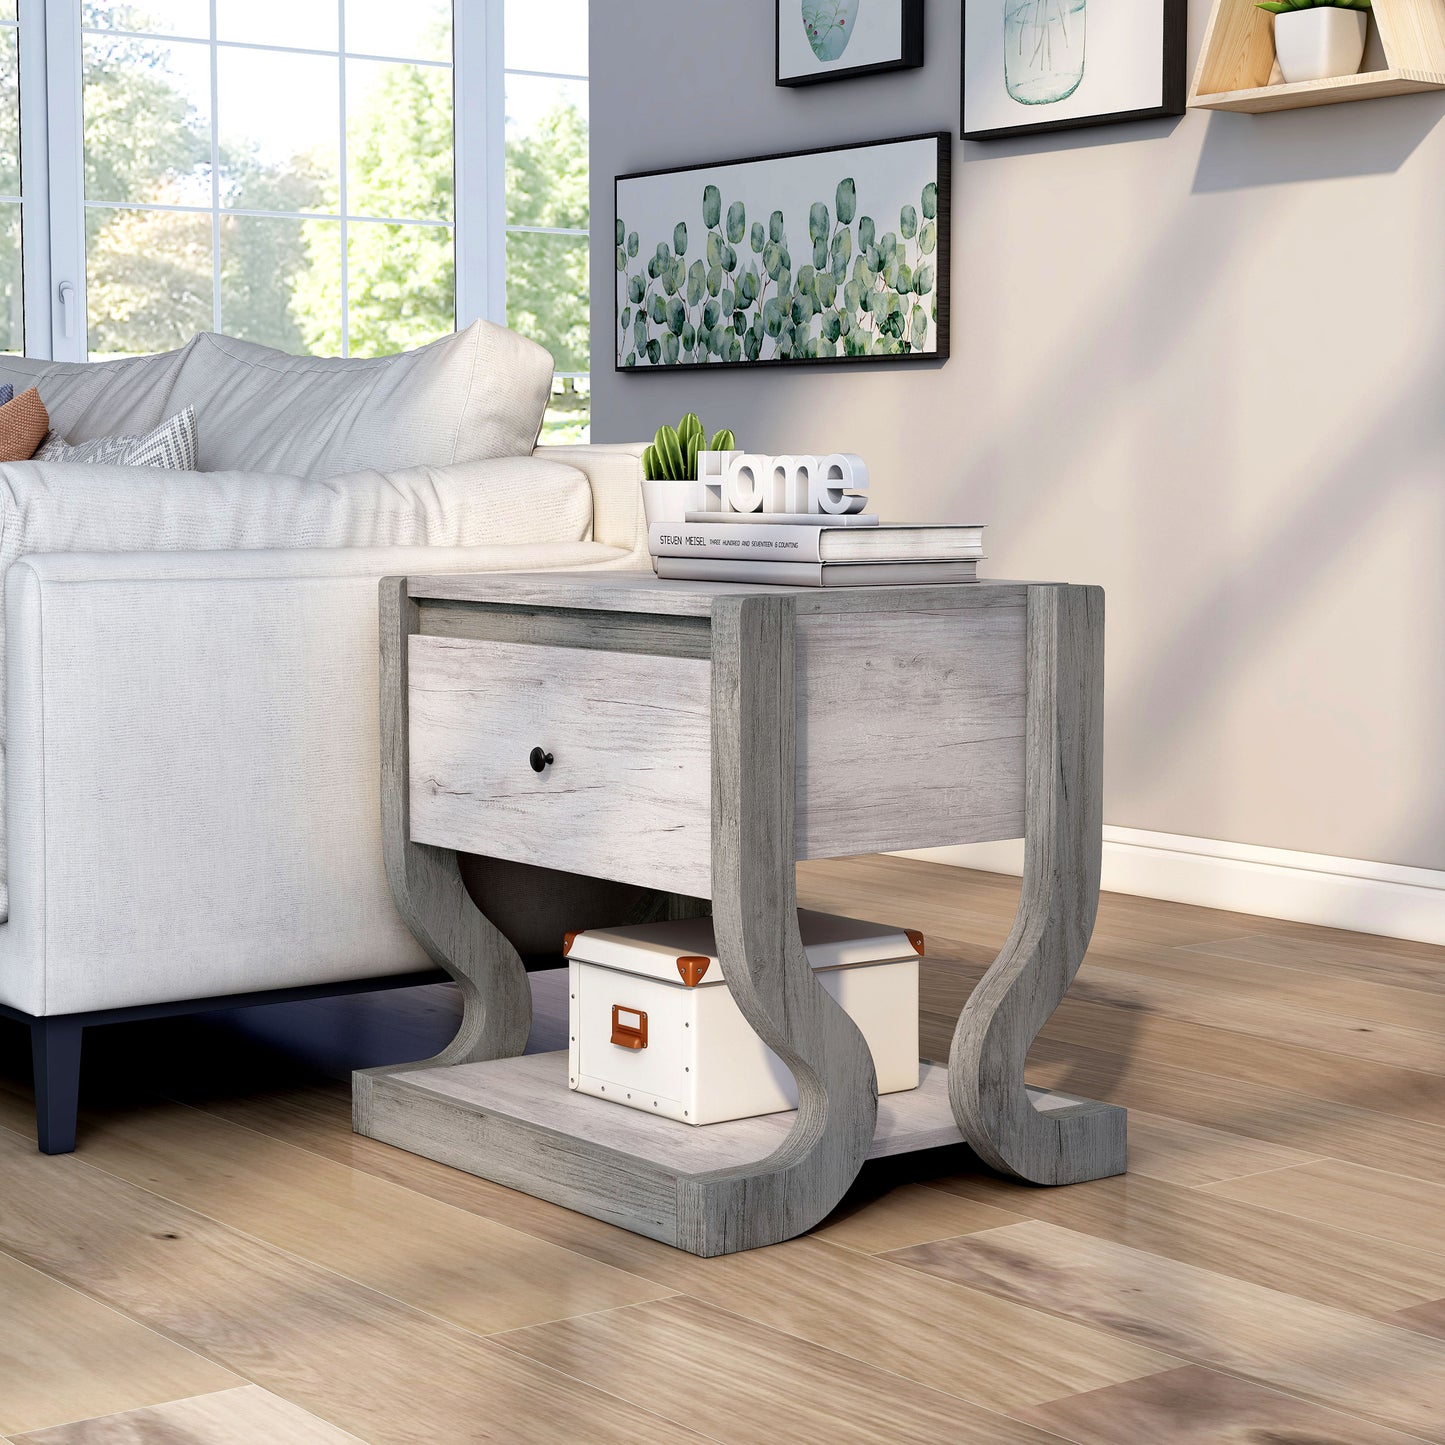 Left angled transitional coastal white one-drawer side table with a shelf in a living room with accessories